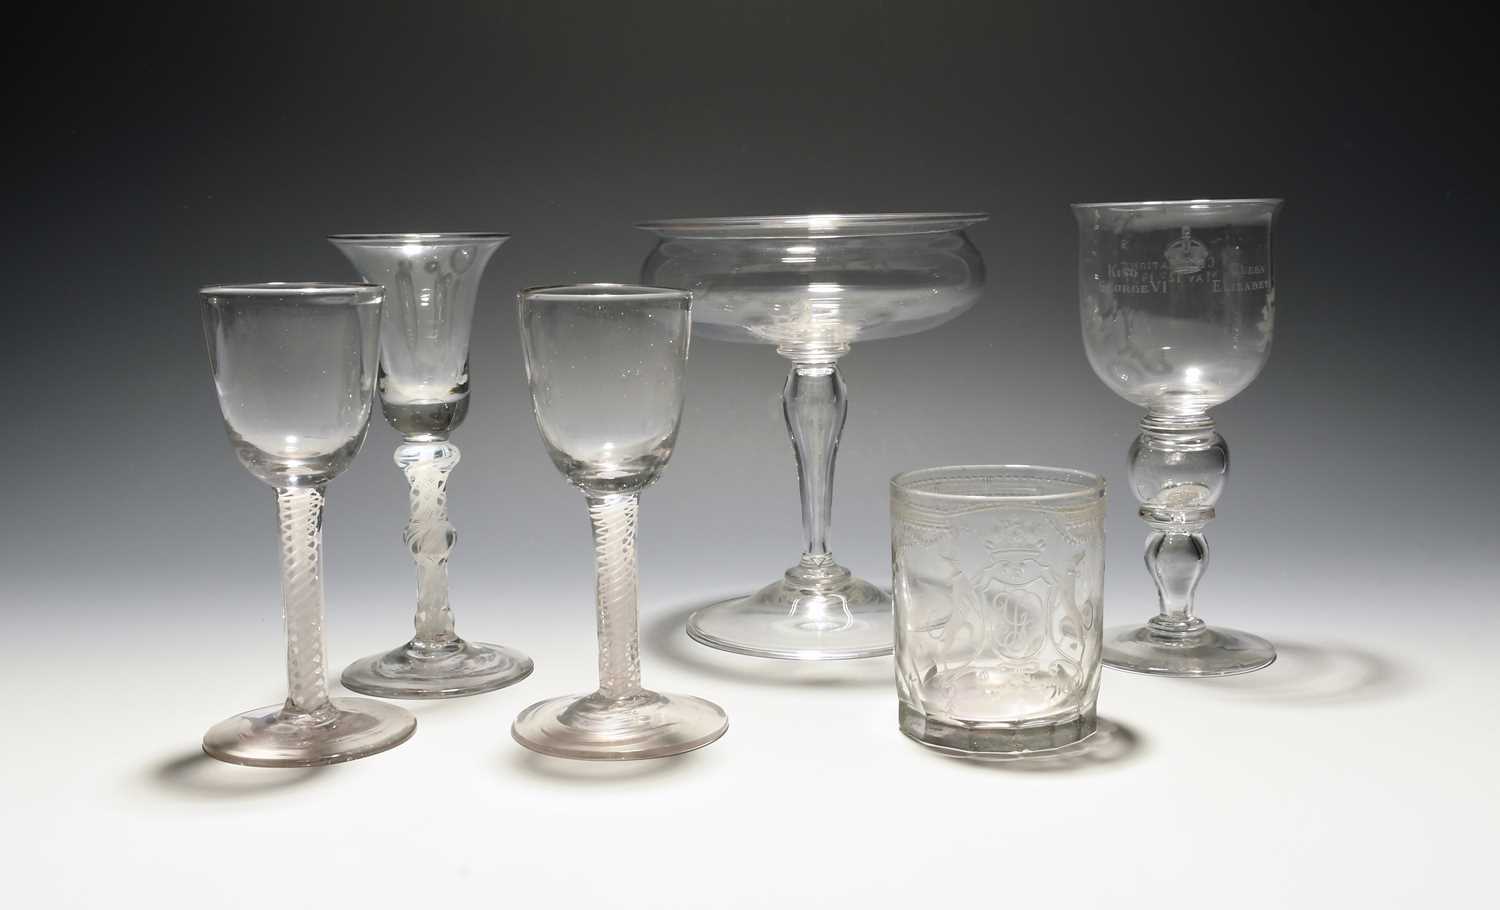 Three wine glasses, mid 18th century, one English with a bell bowl, two Continental with round